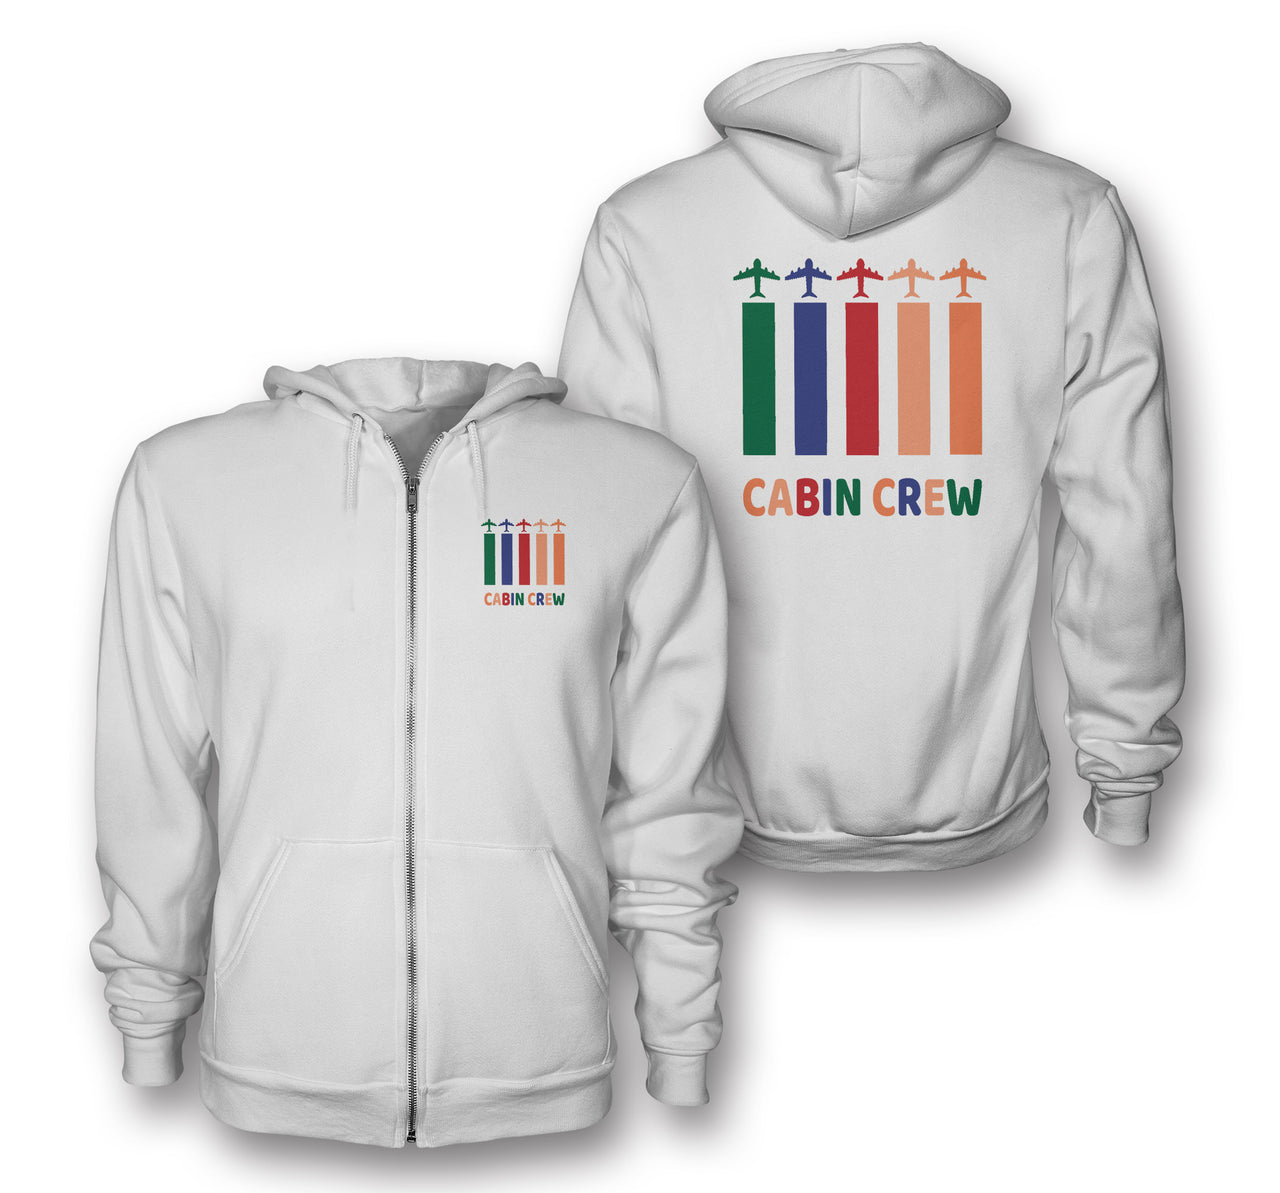 Colourful Cabin Crew Designed Zipped Hoodies